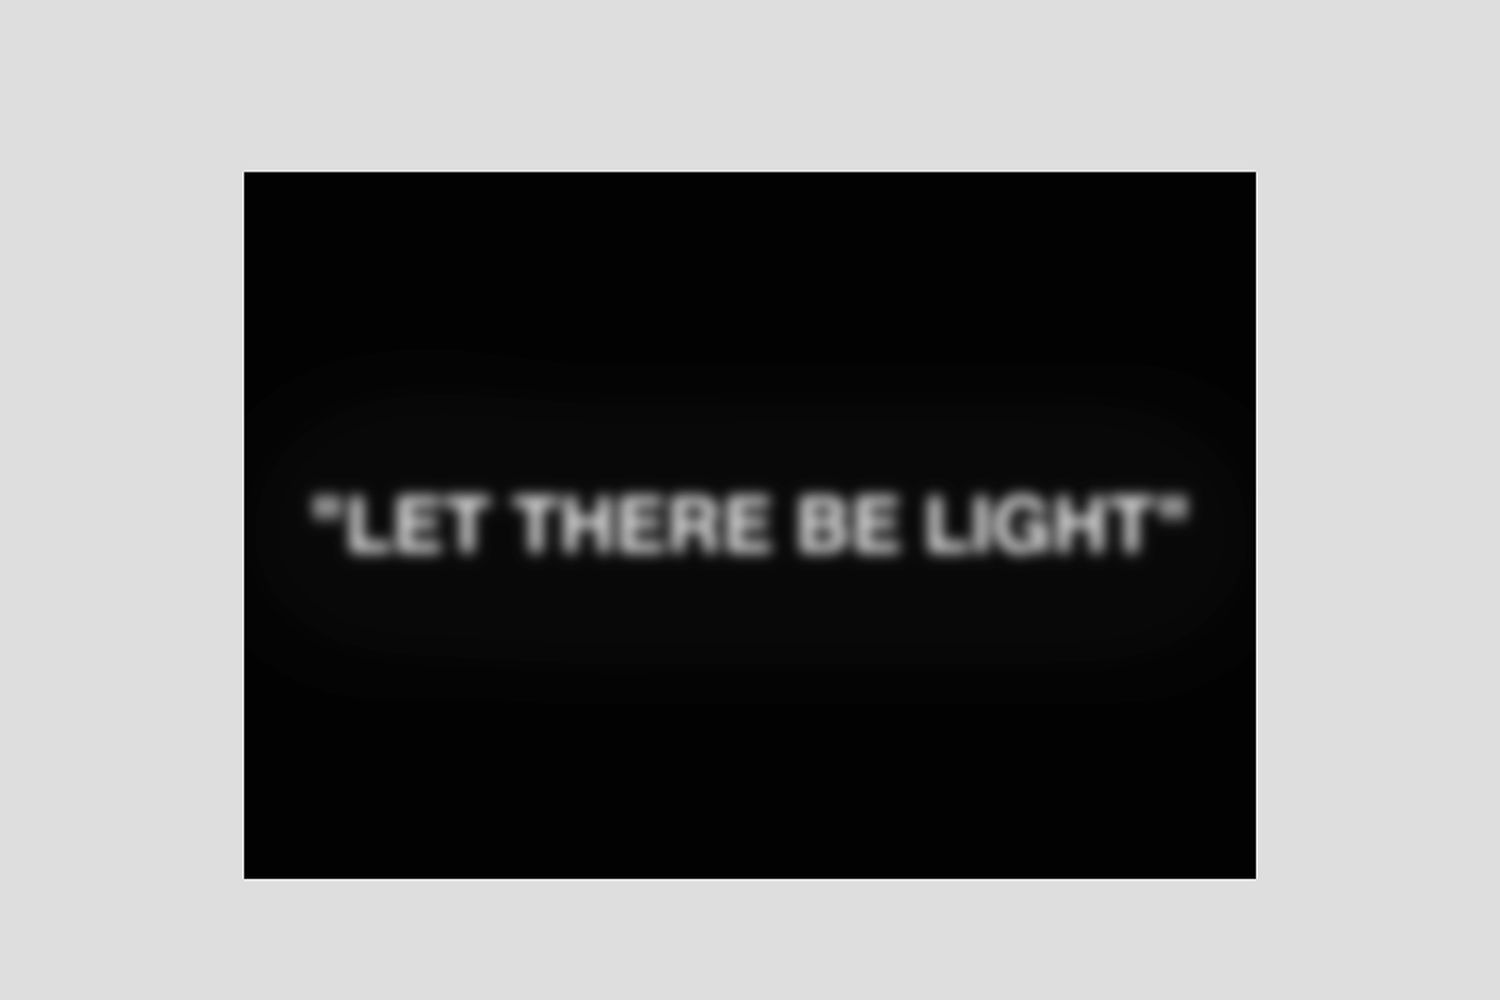 “LET THERE BE LIGHT”  c/o Virgil Abloh Poster